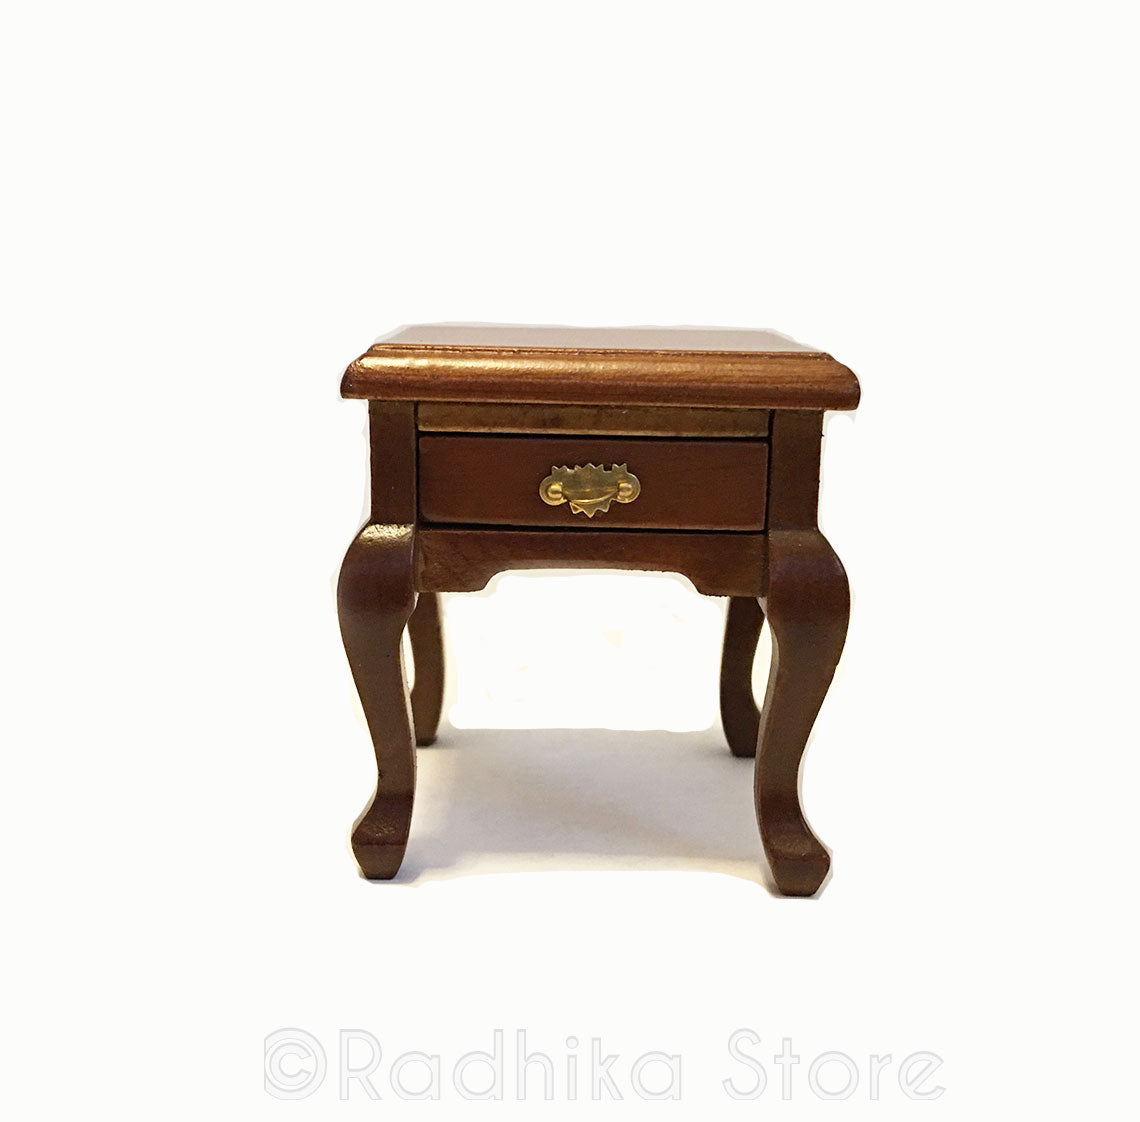 Walnut Chawki (Offering Table) or End Table With Drawer